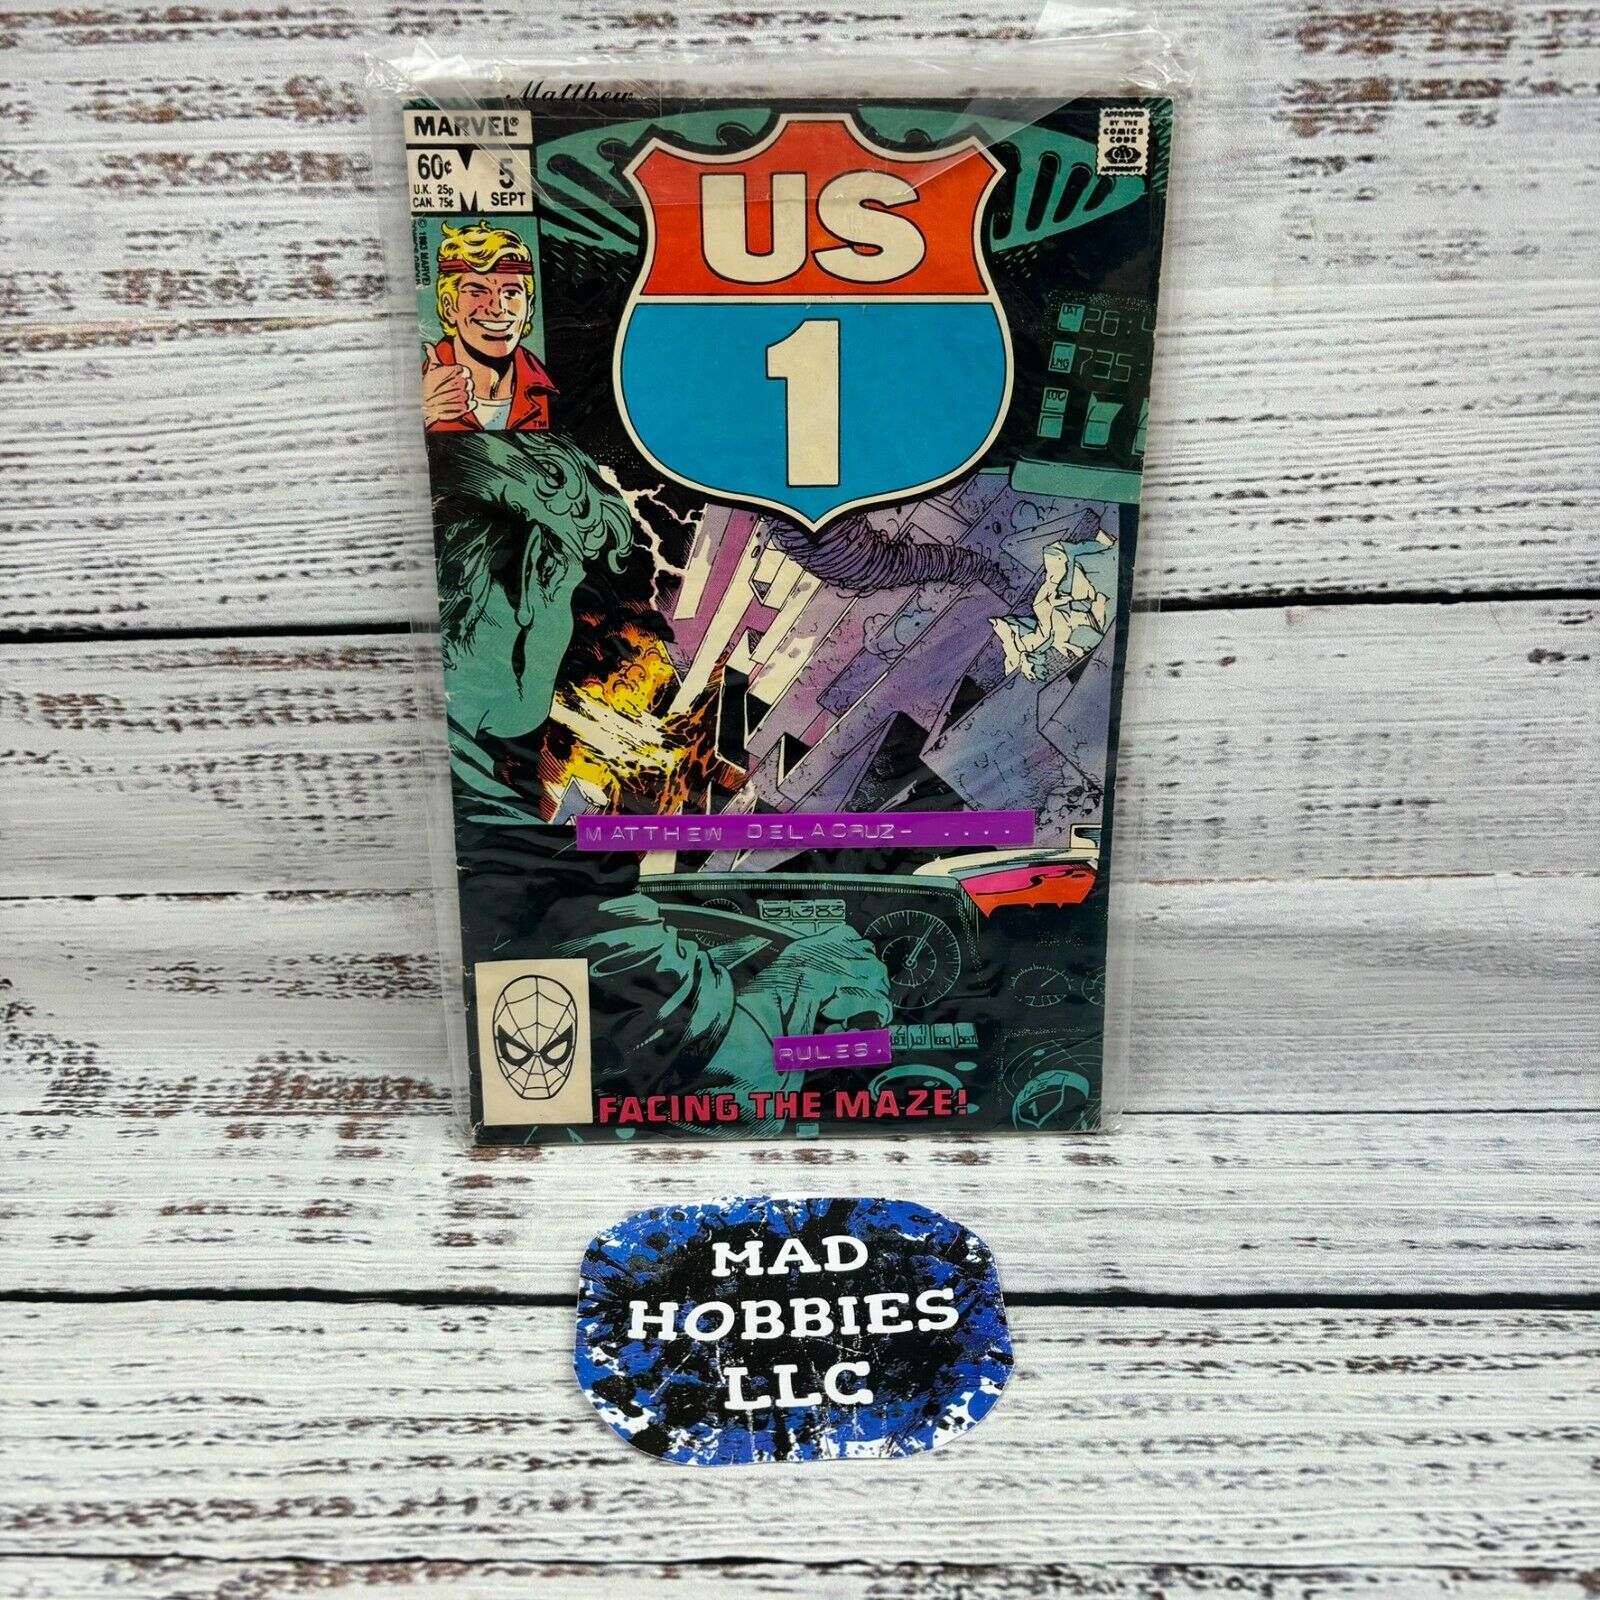 US 1 #5 Marvel Stan Lee High Adventure On The Highway Facing The Maze 1983